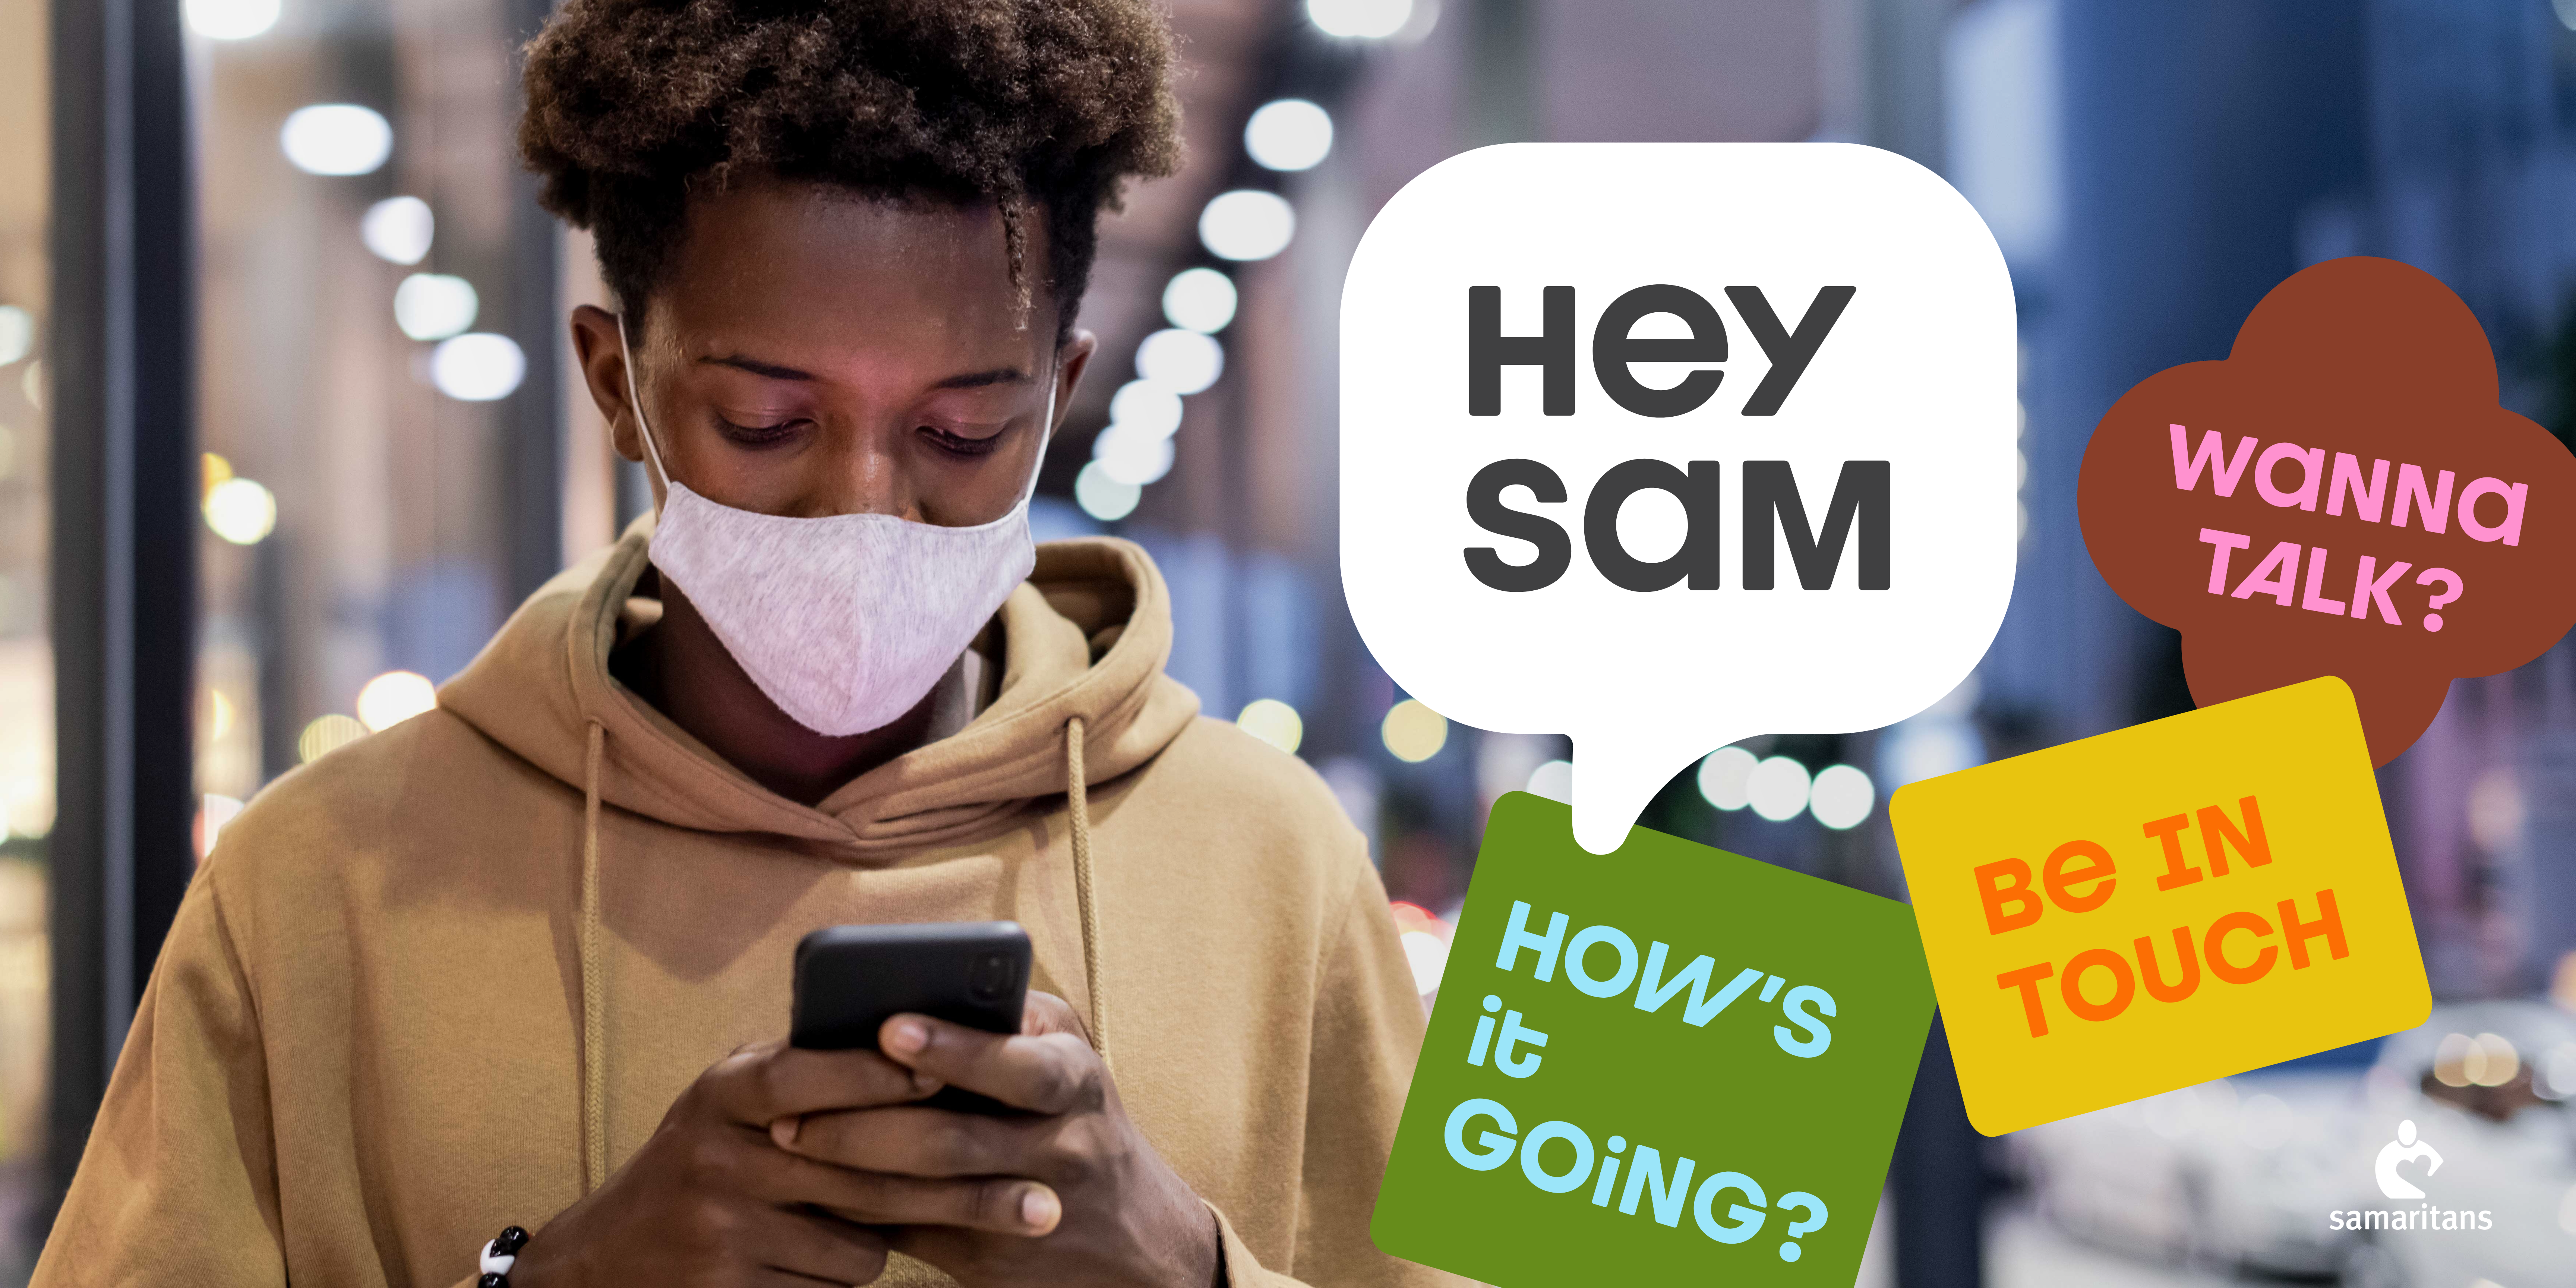 Young adult, texting Hey Sam support line.